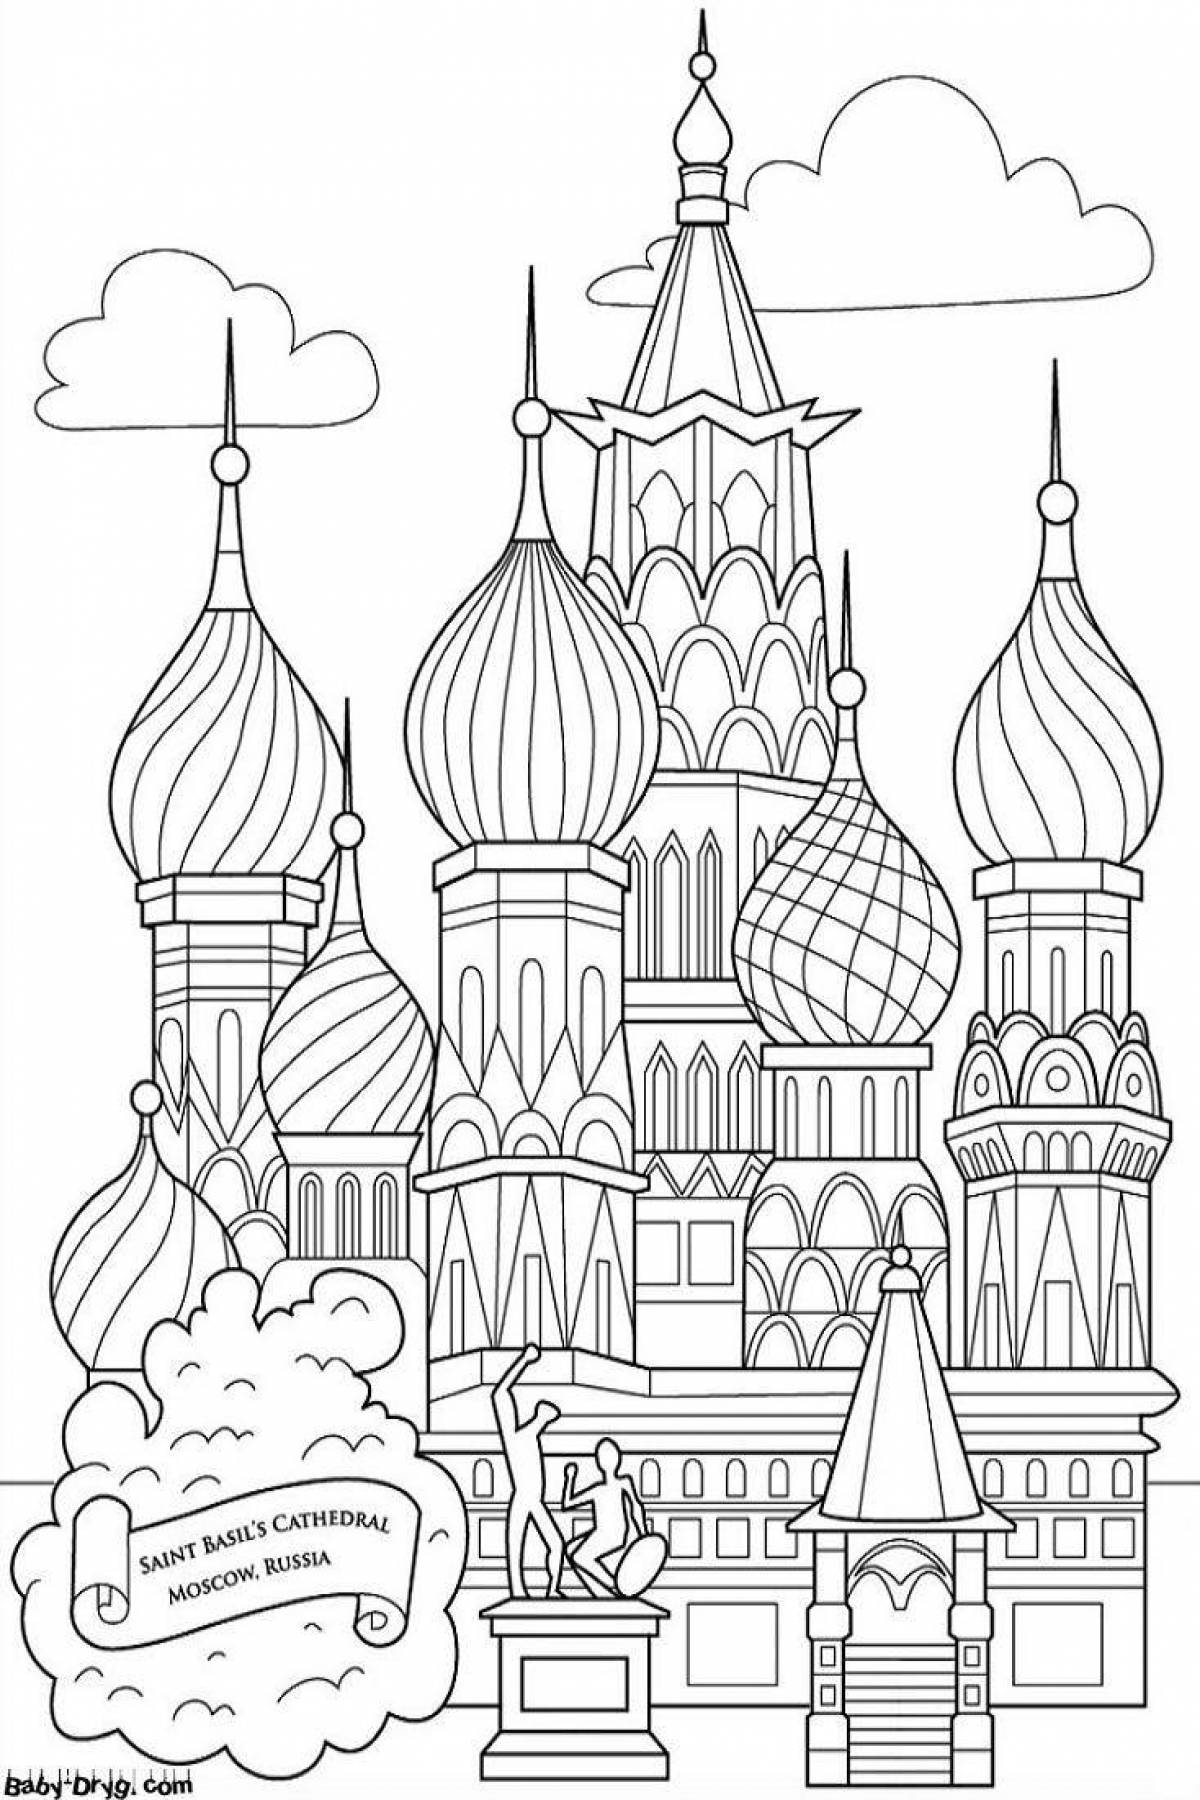 Coloring page luxury moscow kremlin